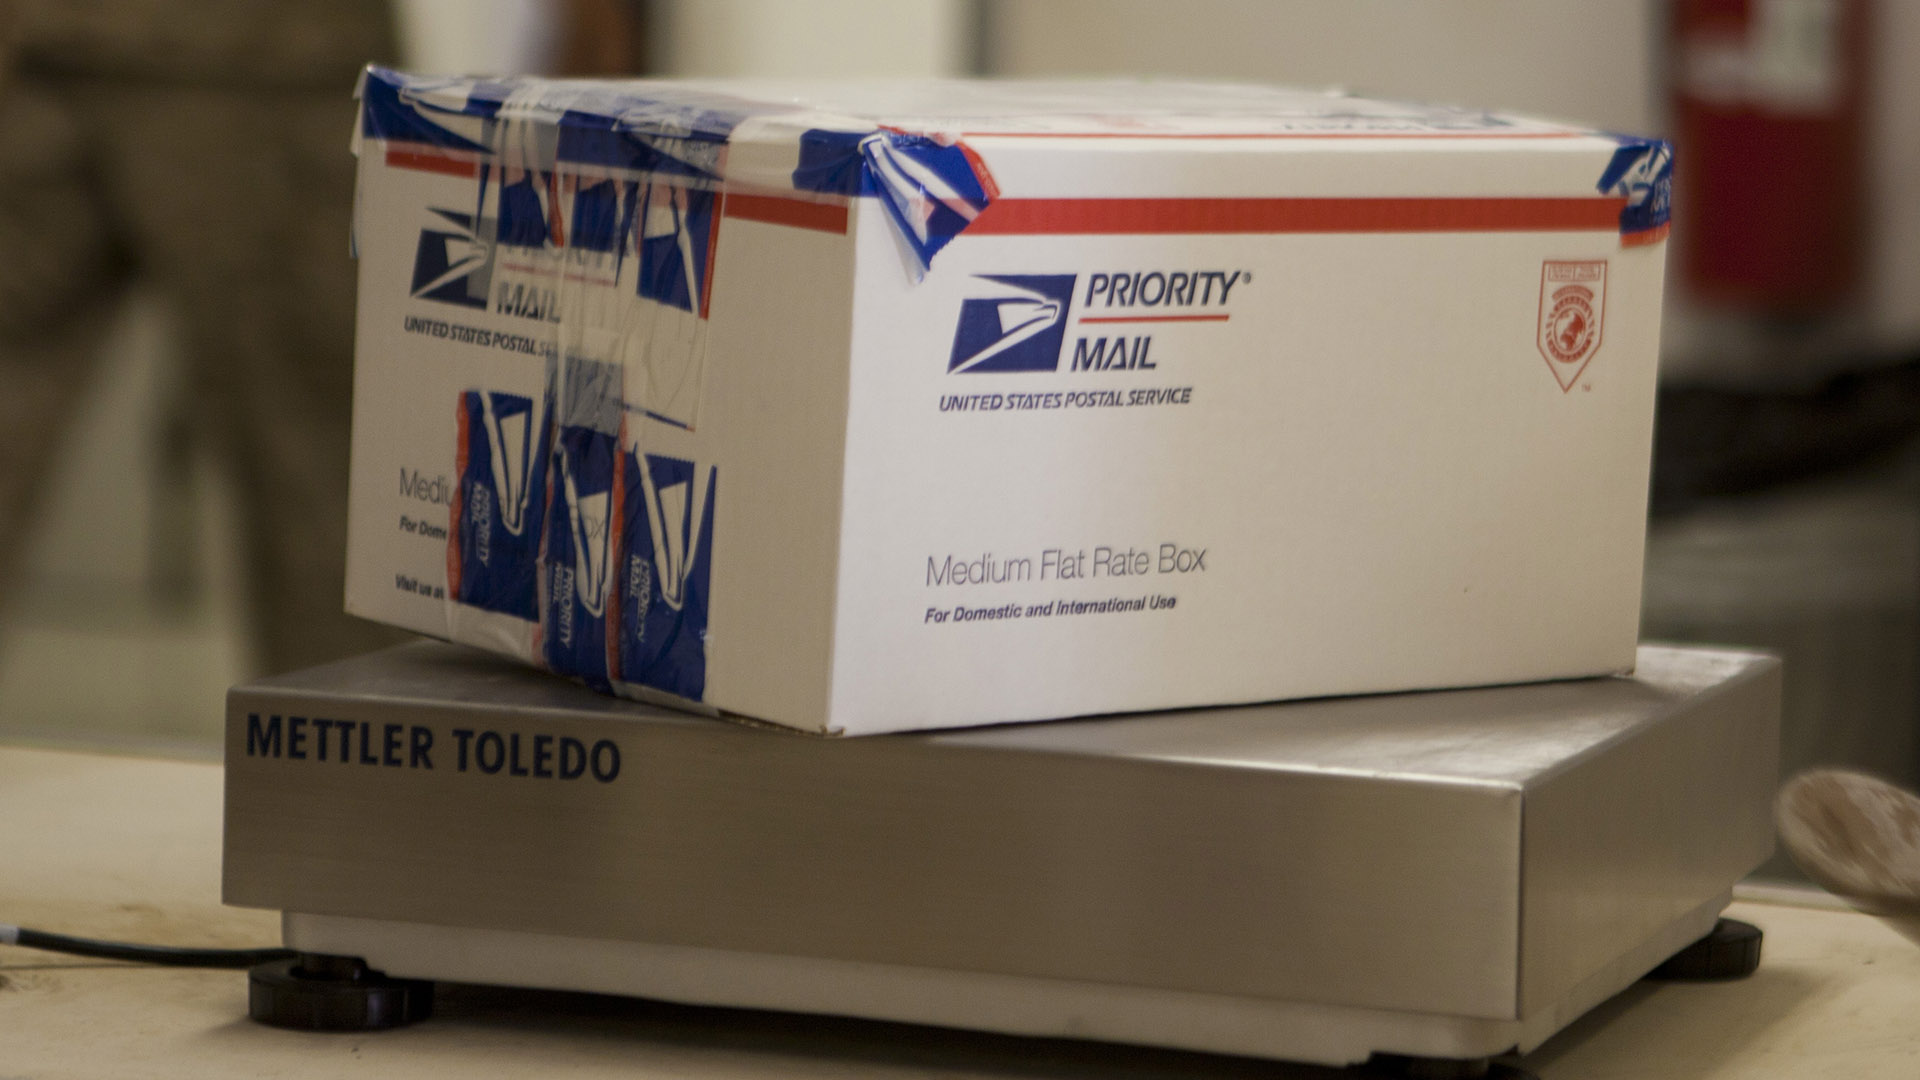 usps large flat rate box shipping rate